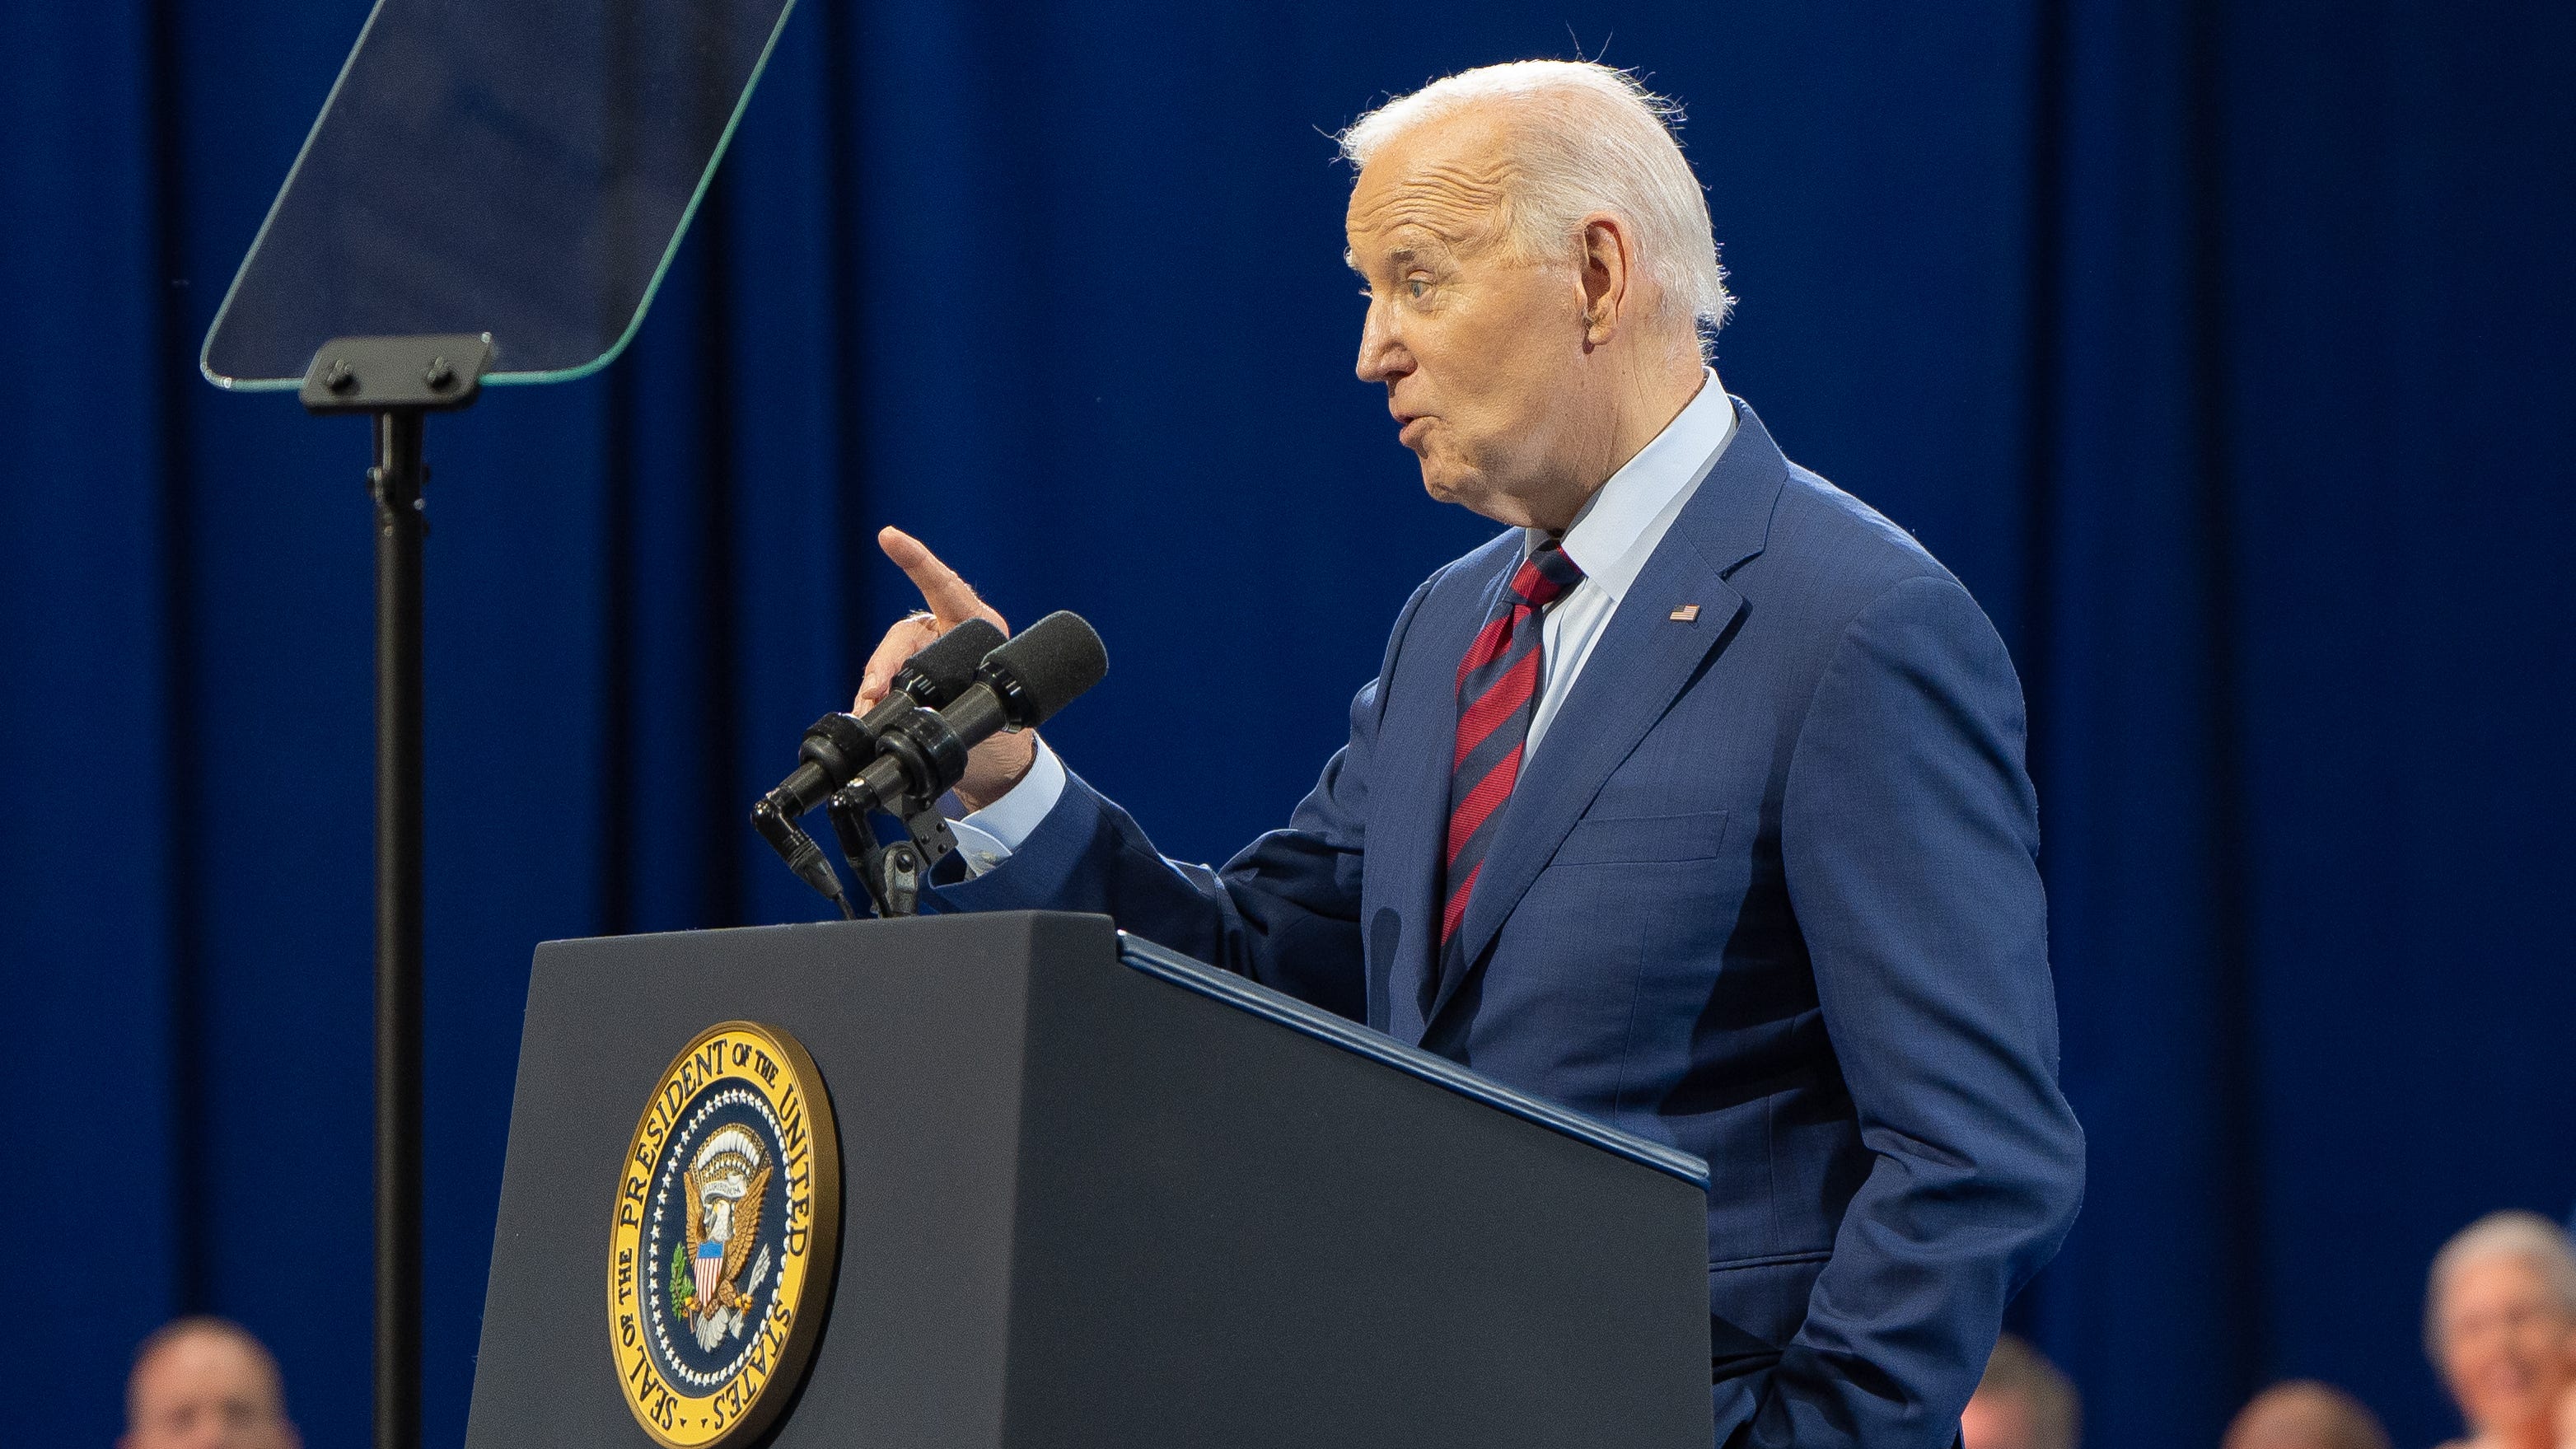 In Wilmington speech, Biden stresses access to clean water with new federal funding